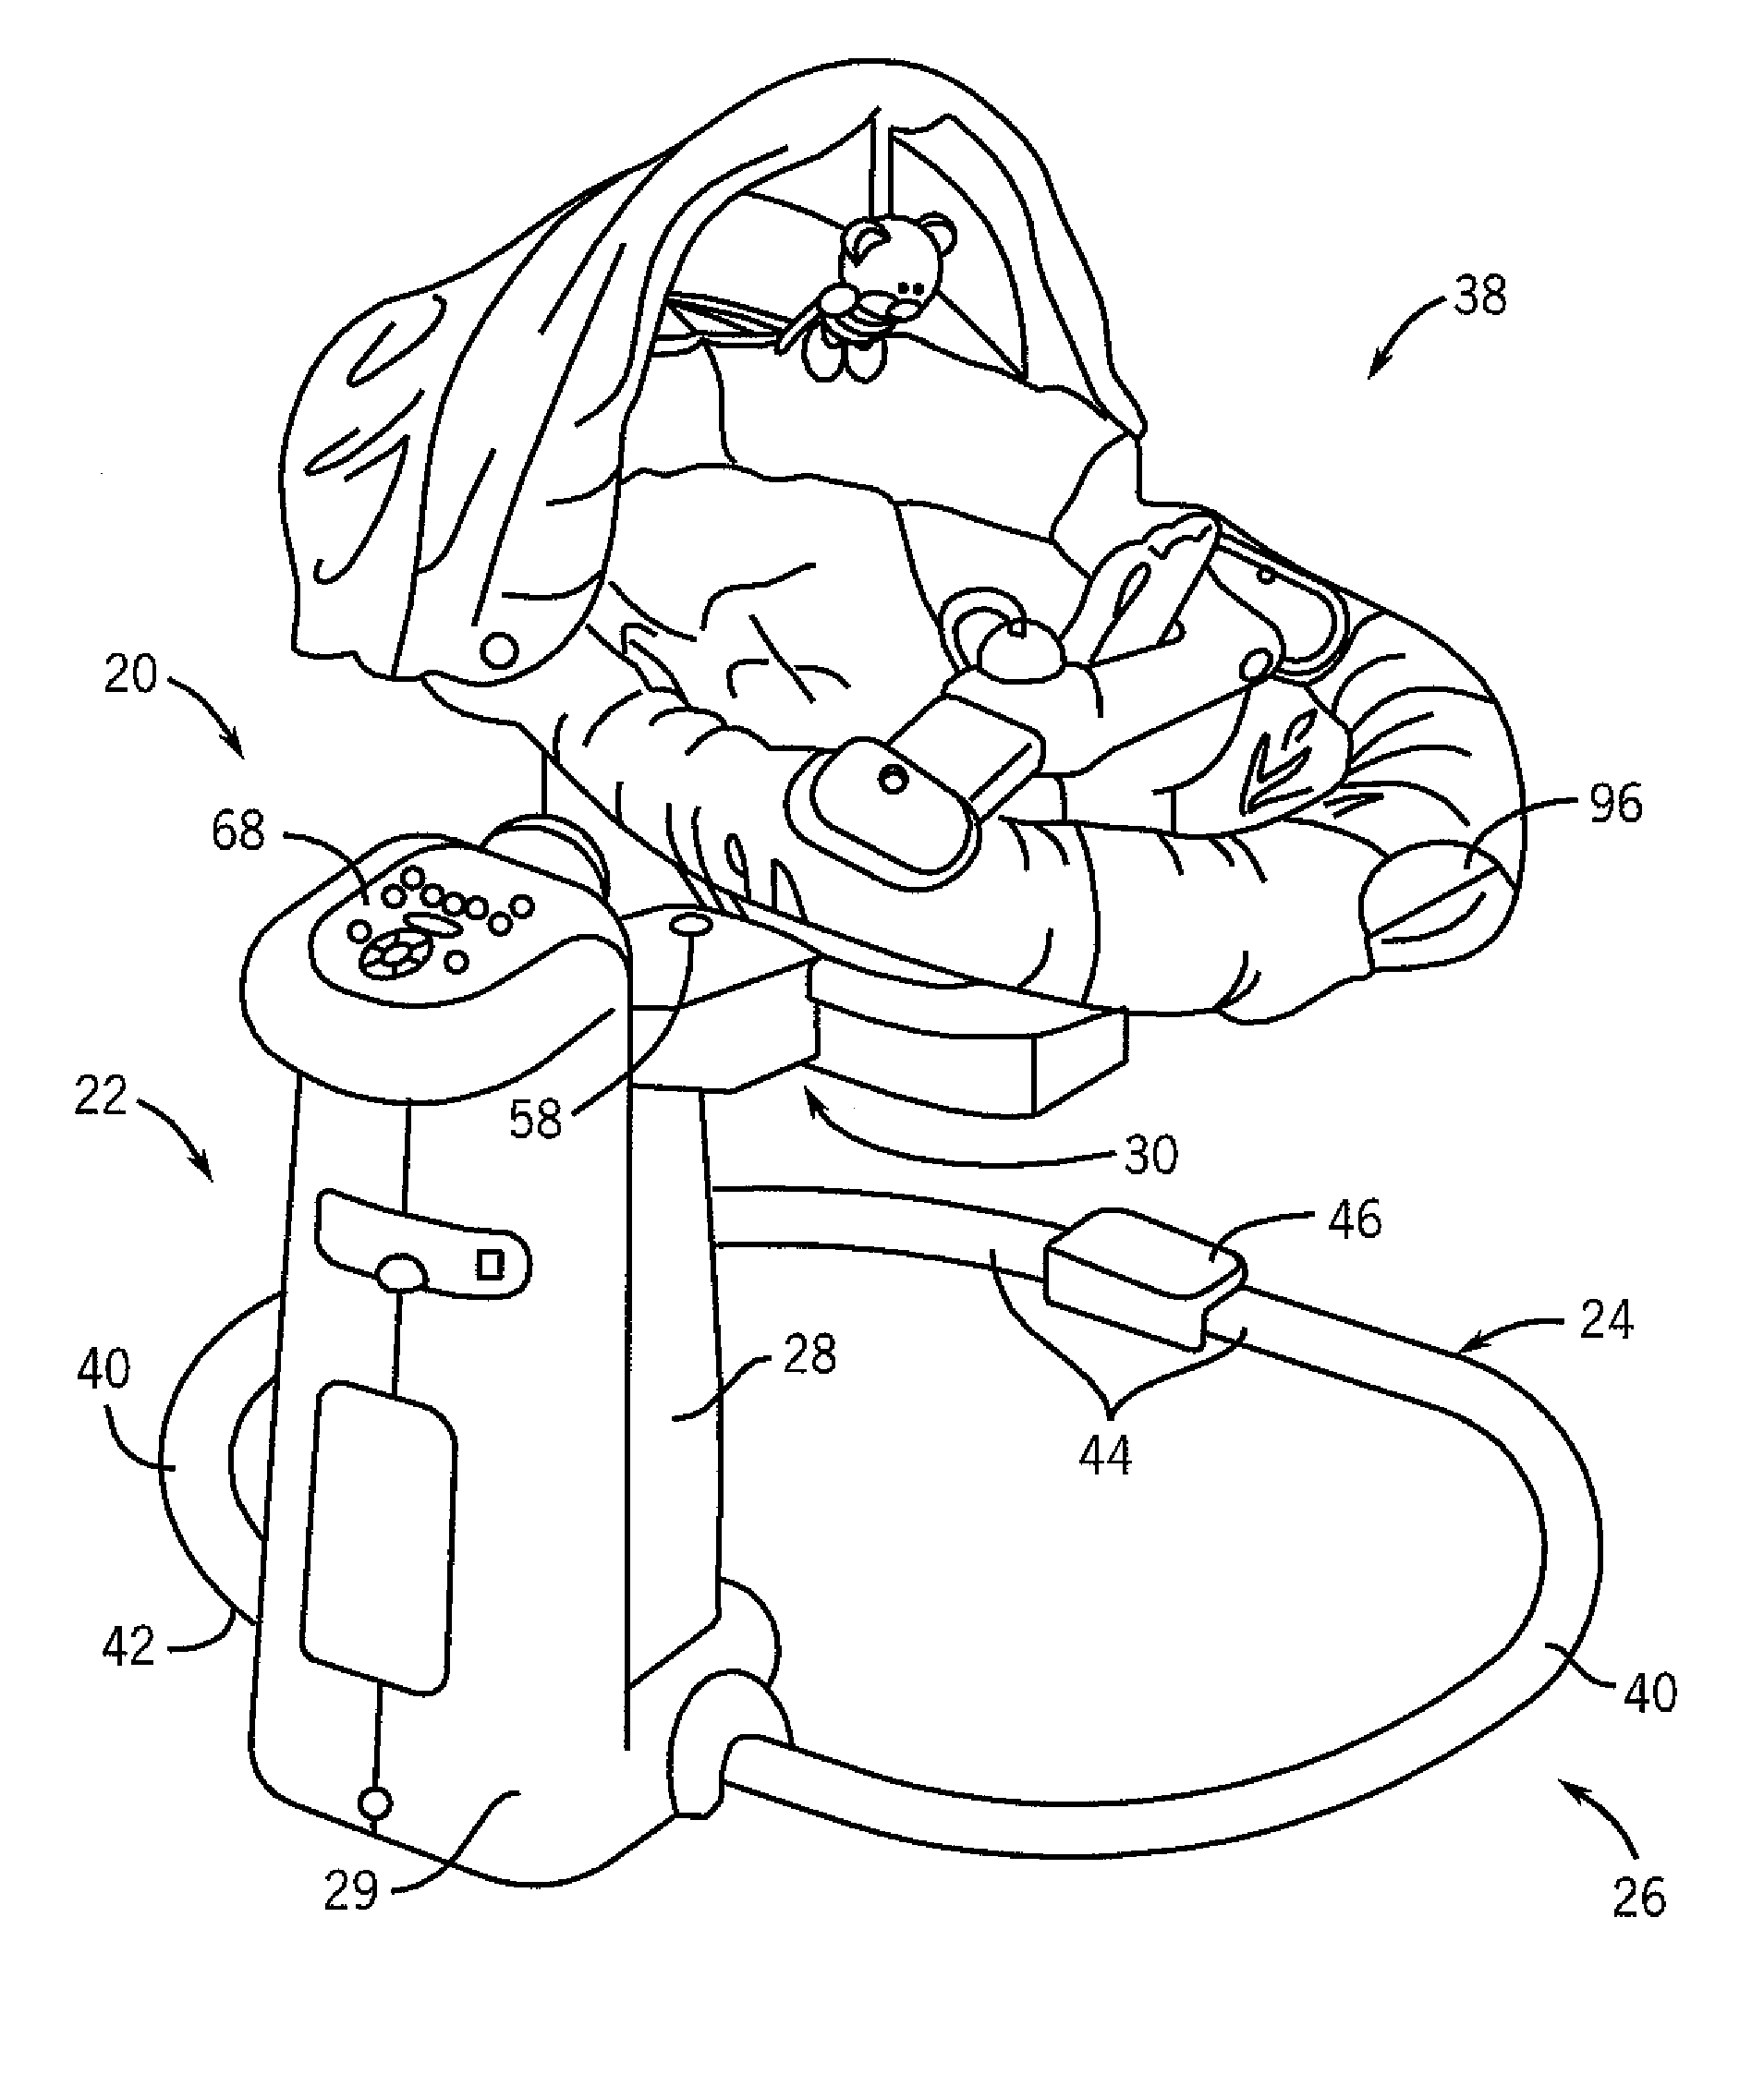 Seat support structure for a child motion device